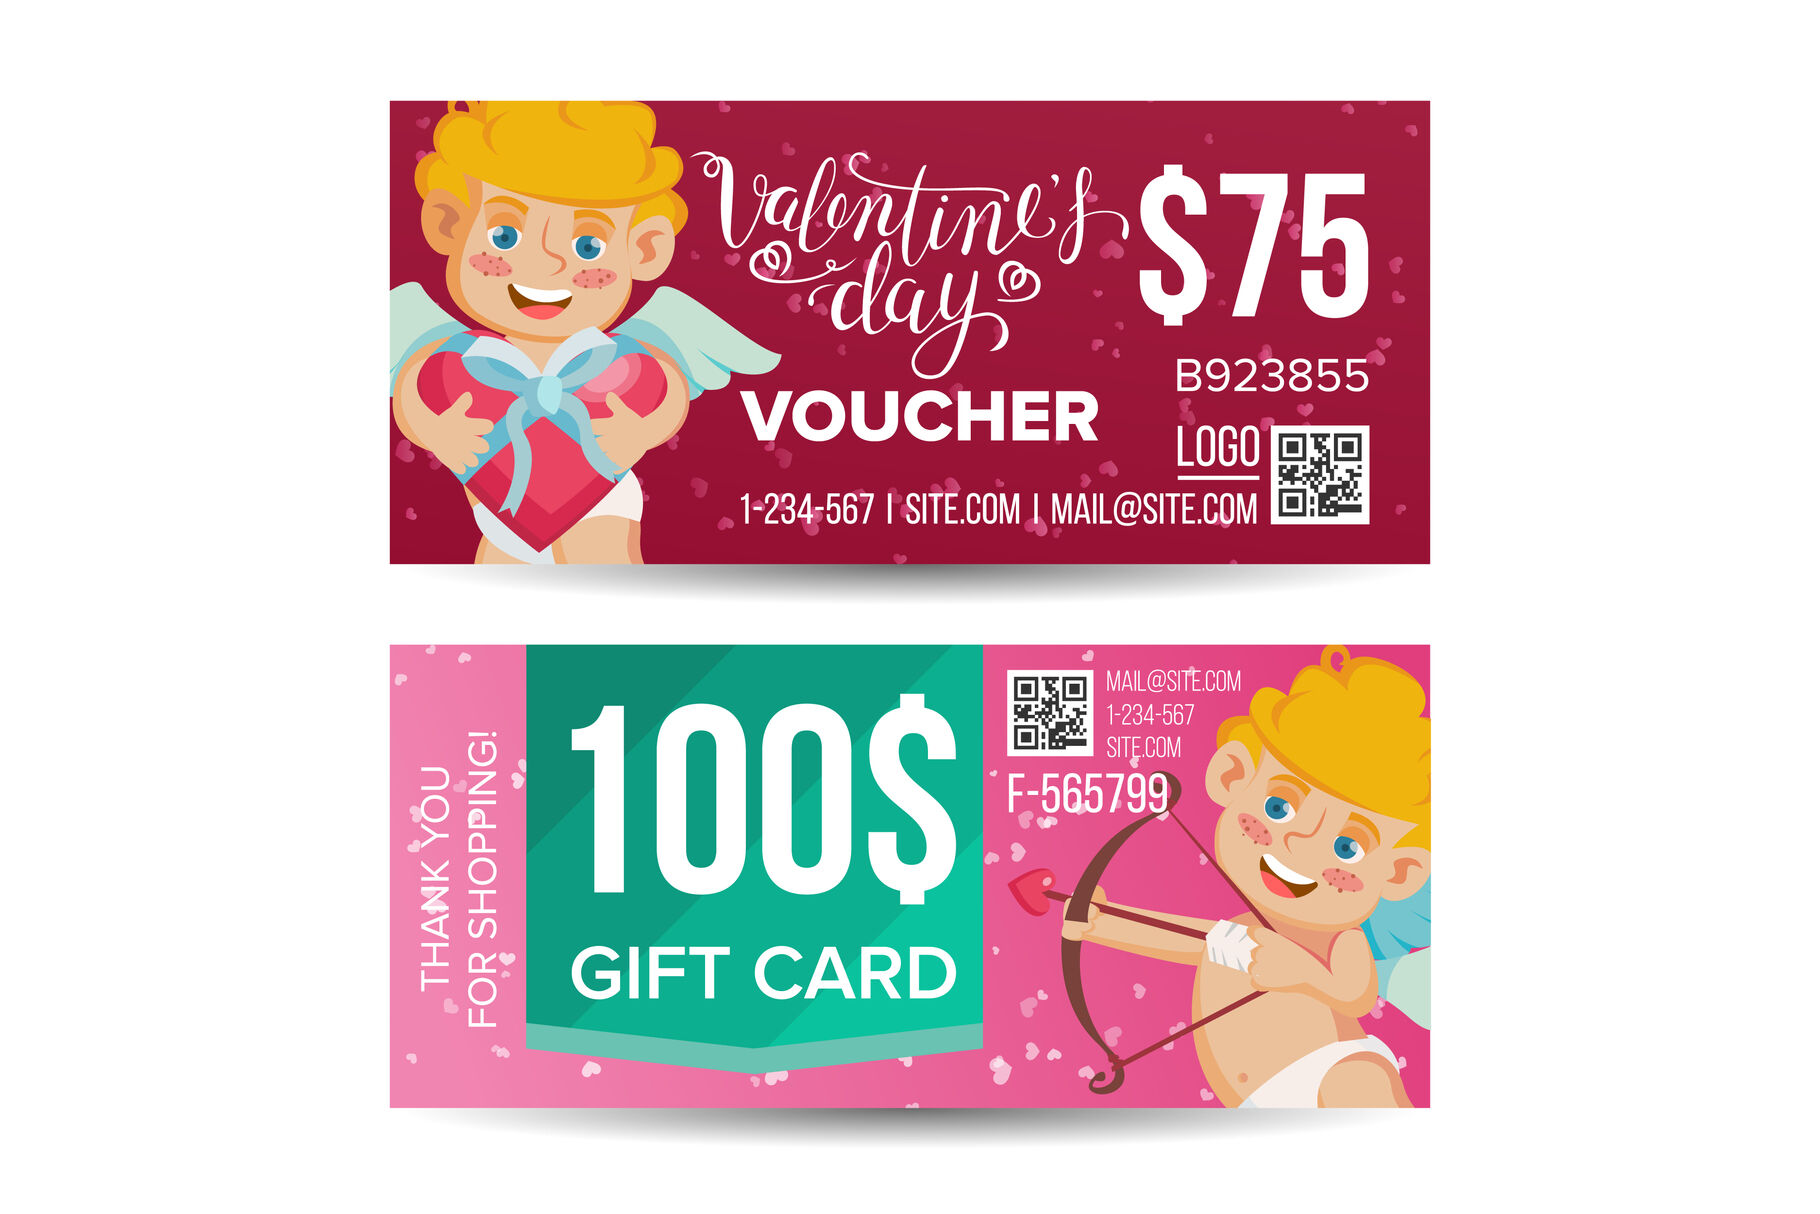 Valentine S Day Voucher Design Vector Horizontal Discount February 14 Valentine Cupid And Gifts Love Advertisement Marketing Red Illustration By Pikepicture Thehungryjpeg Com